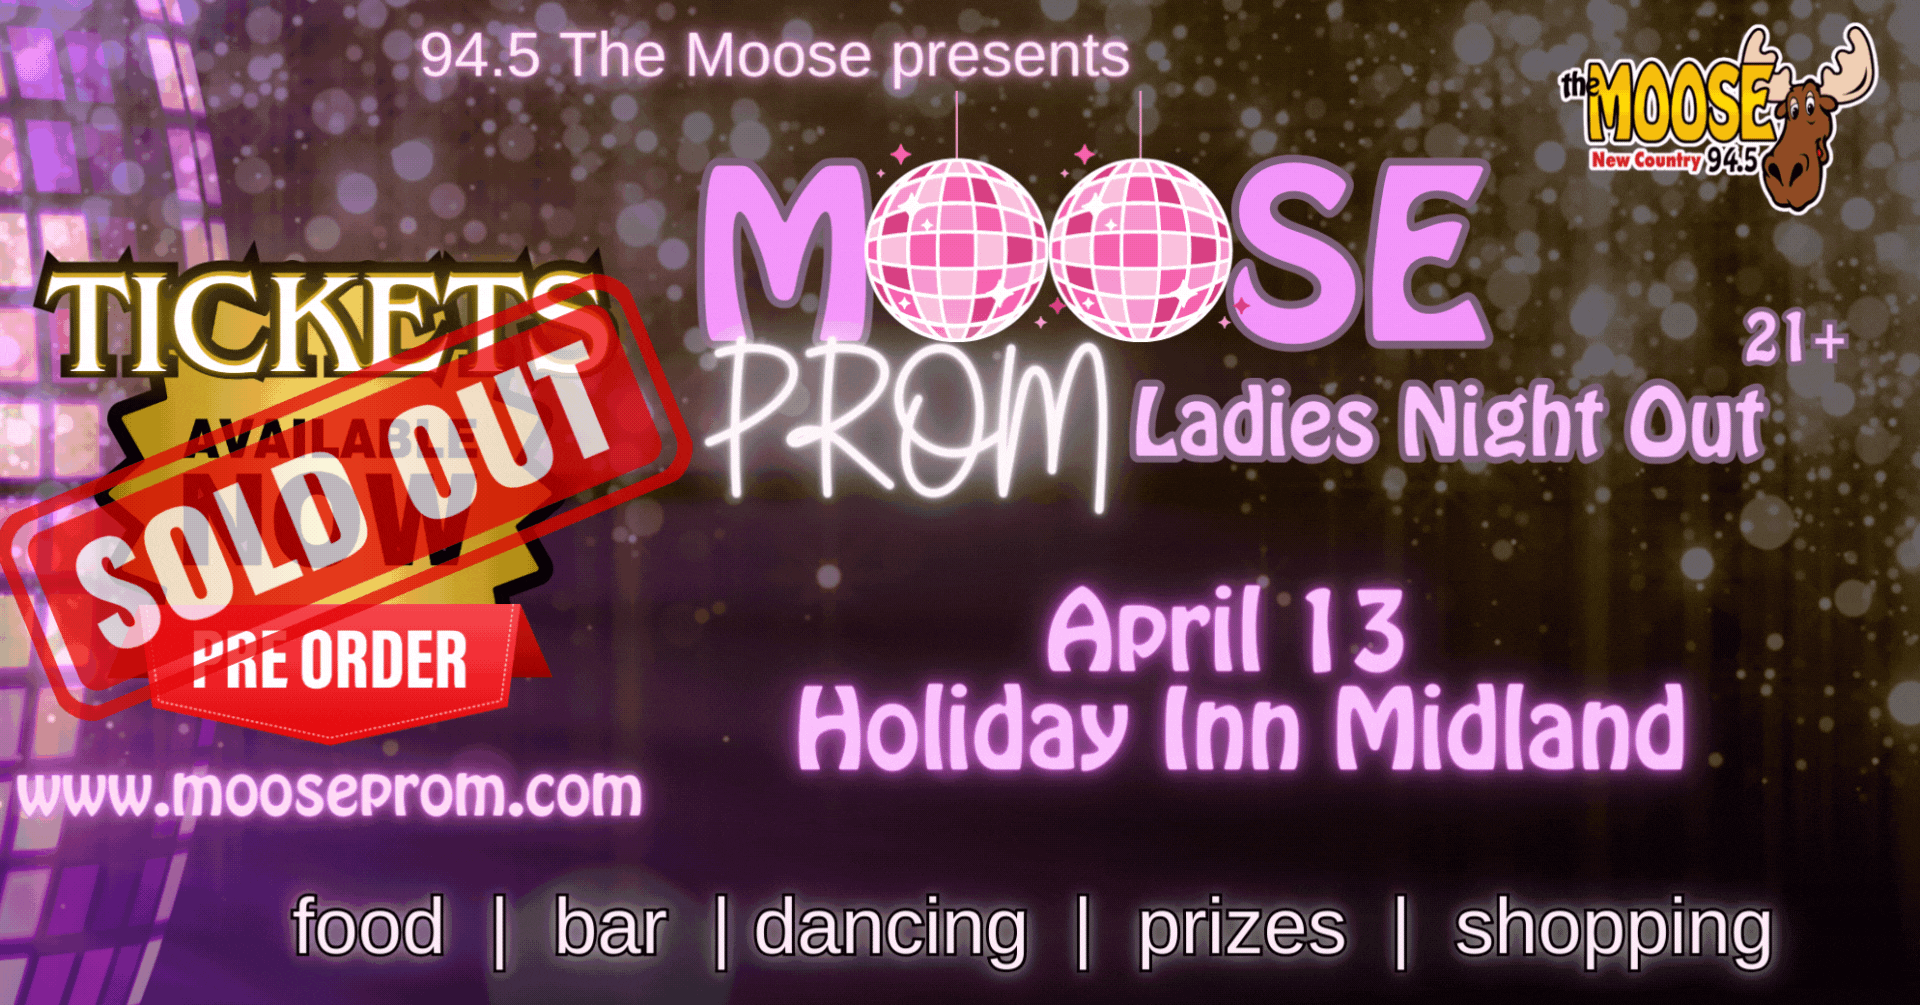 Moose Prom - Ladies Night Out